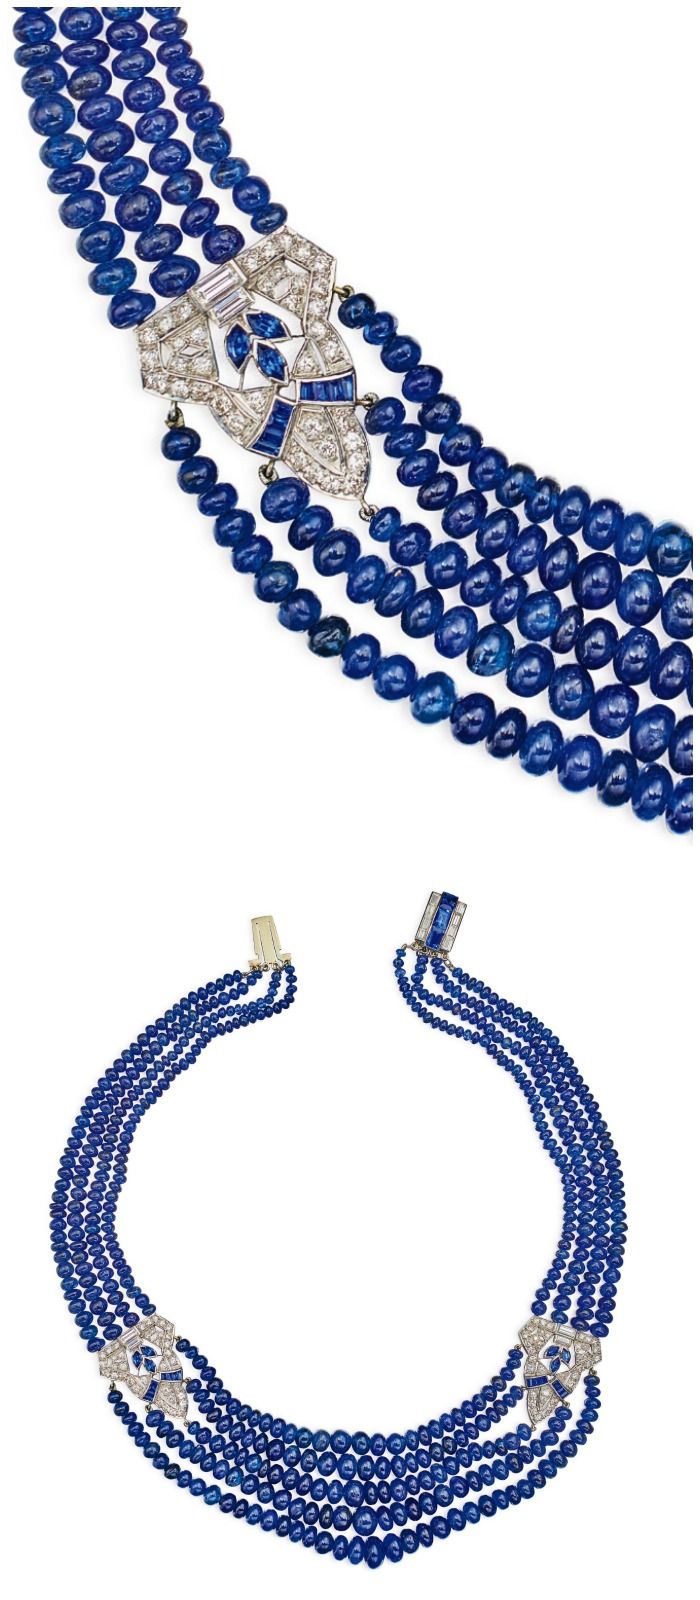 Sapphire and diamond necklace from a recent Sotheby's auction.